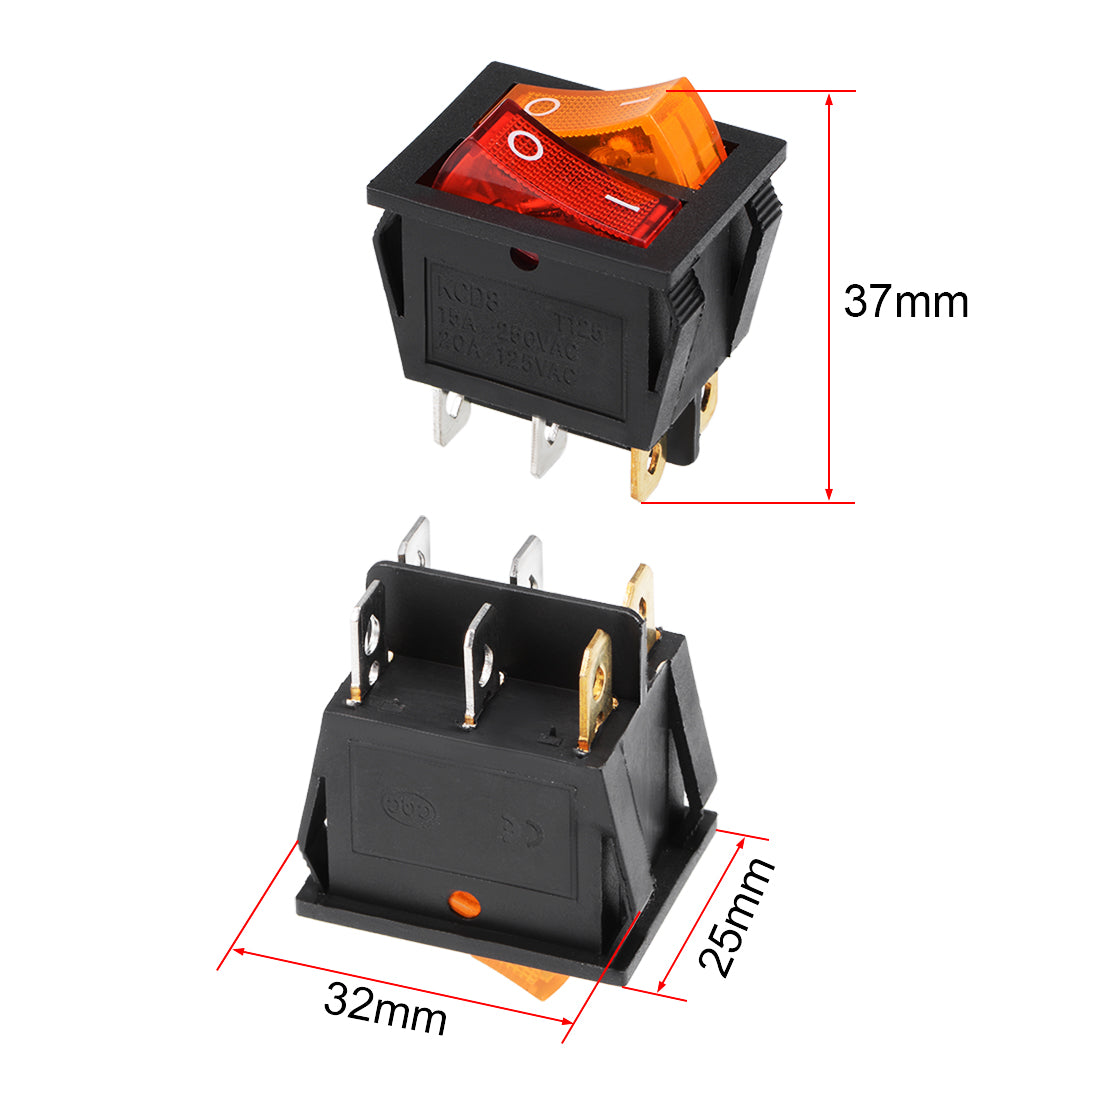 uxcell Uxcell Double Position Boat Rocker Switch 220V Neon Red Orange Shell Toggle Switch for Boat Car Marine ON/OFF AC 250V/15A 125V/20A 2pcs